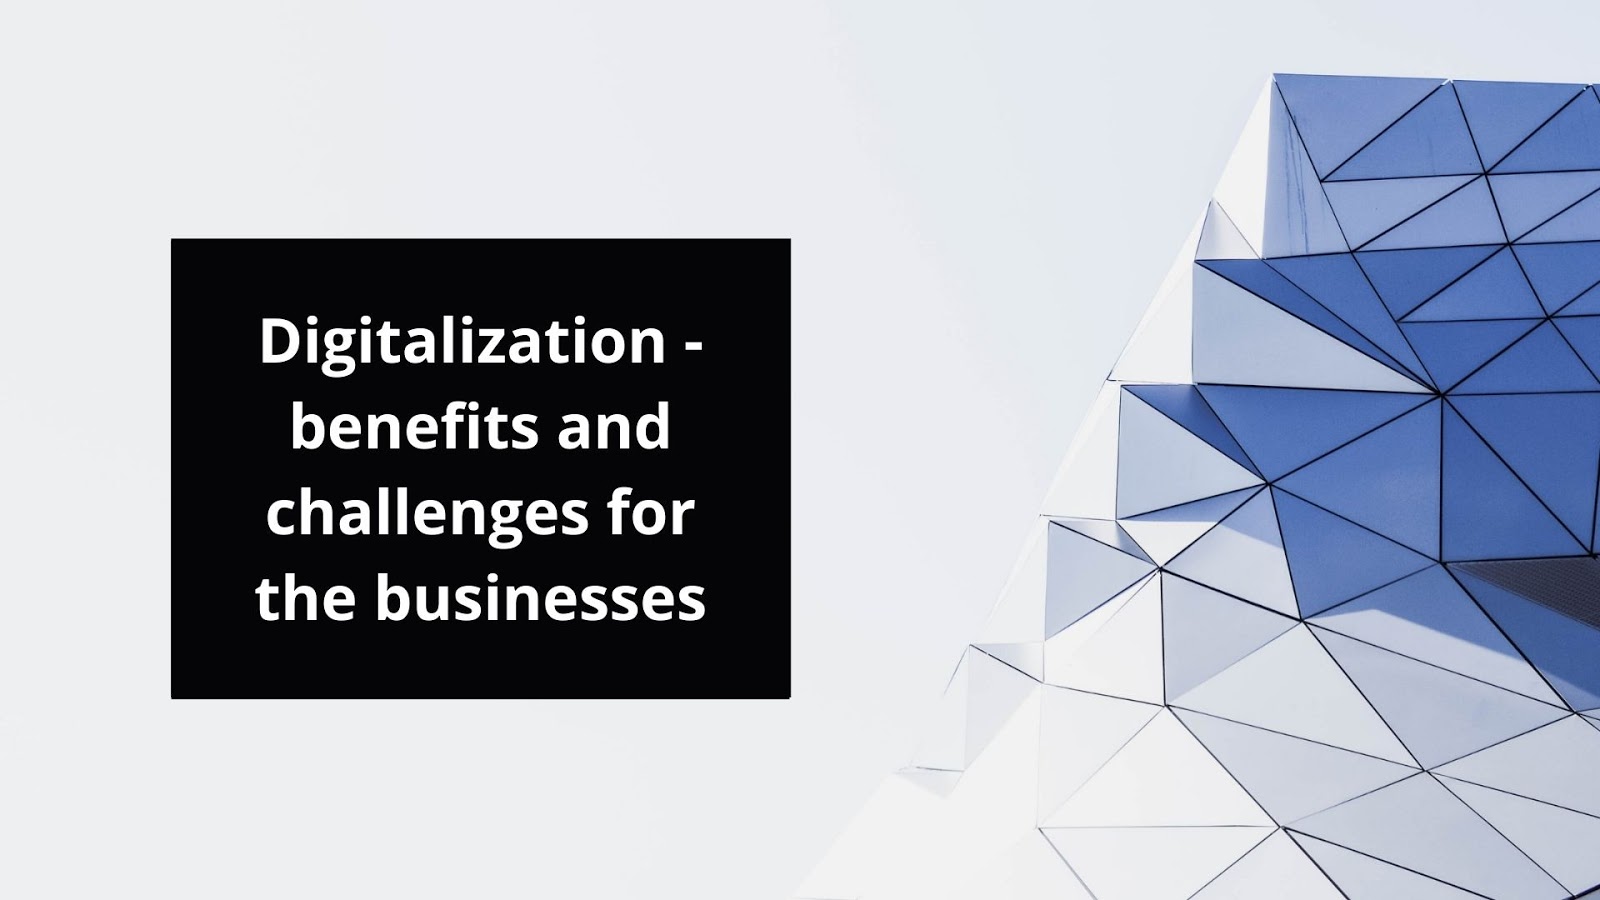 Digitalization - benefits and challenges for the businesses